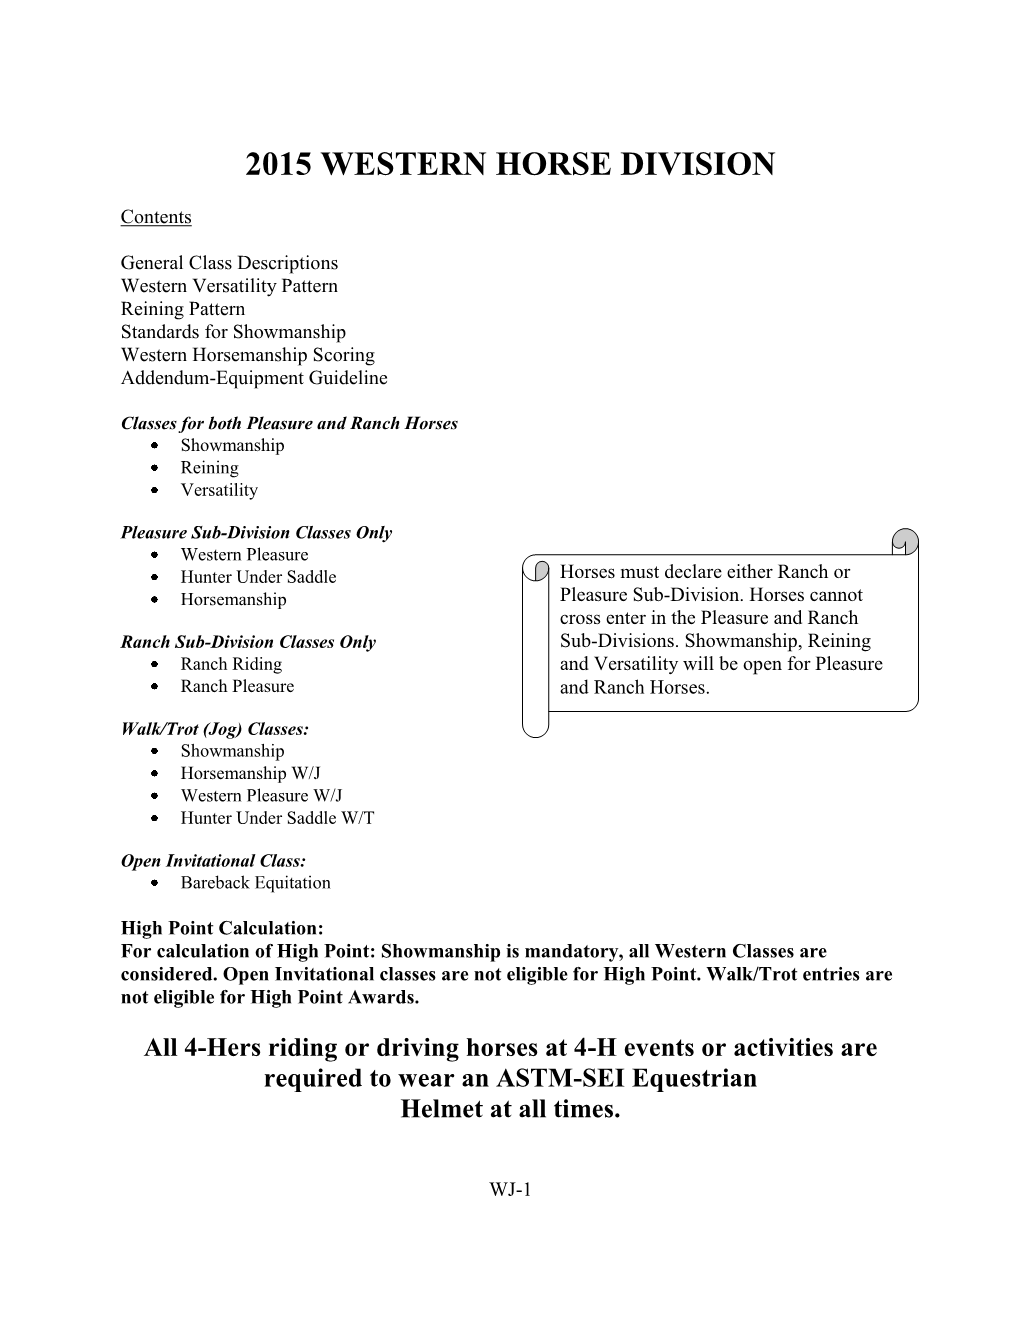 2015 Western Horse Division